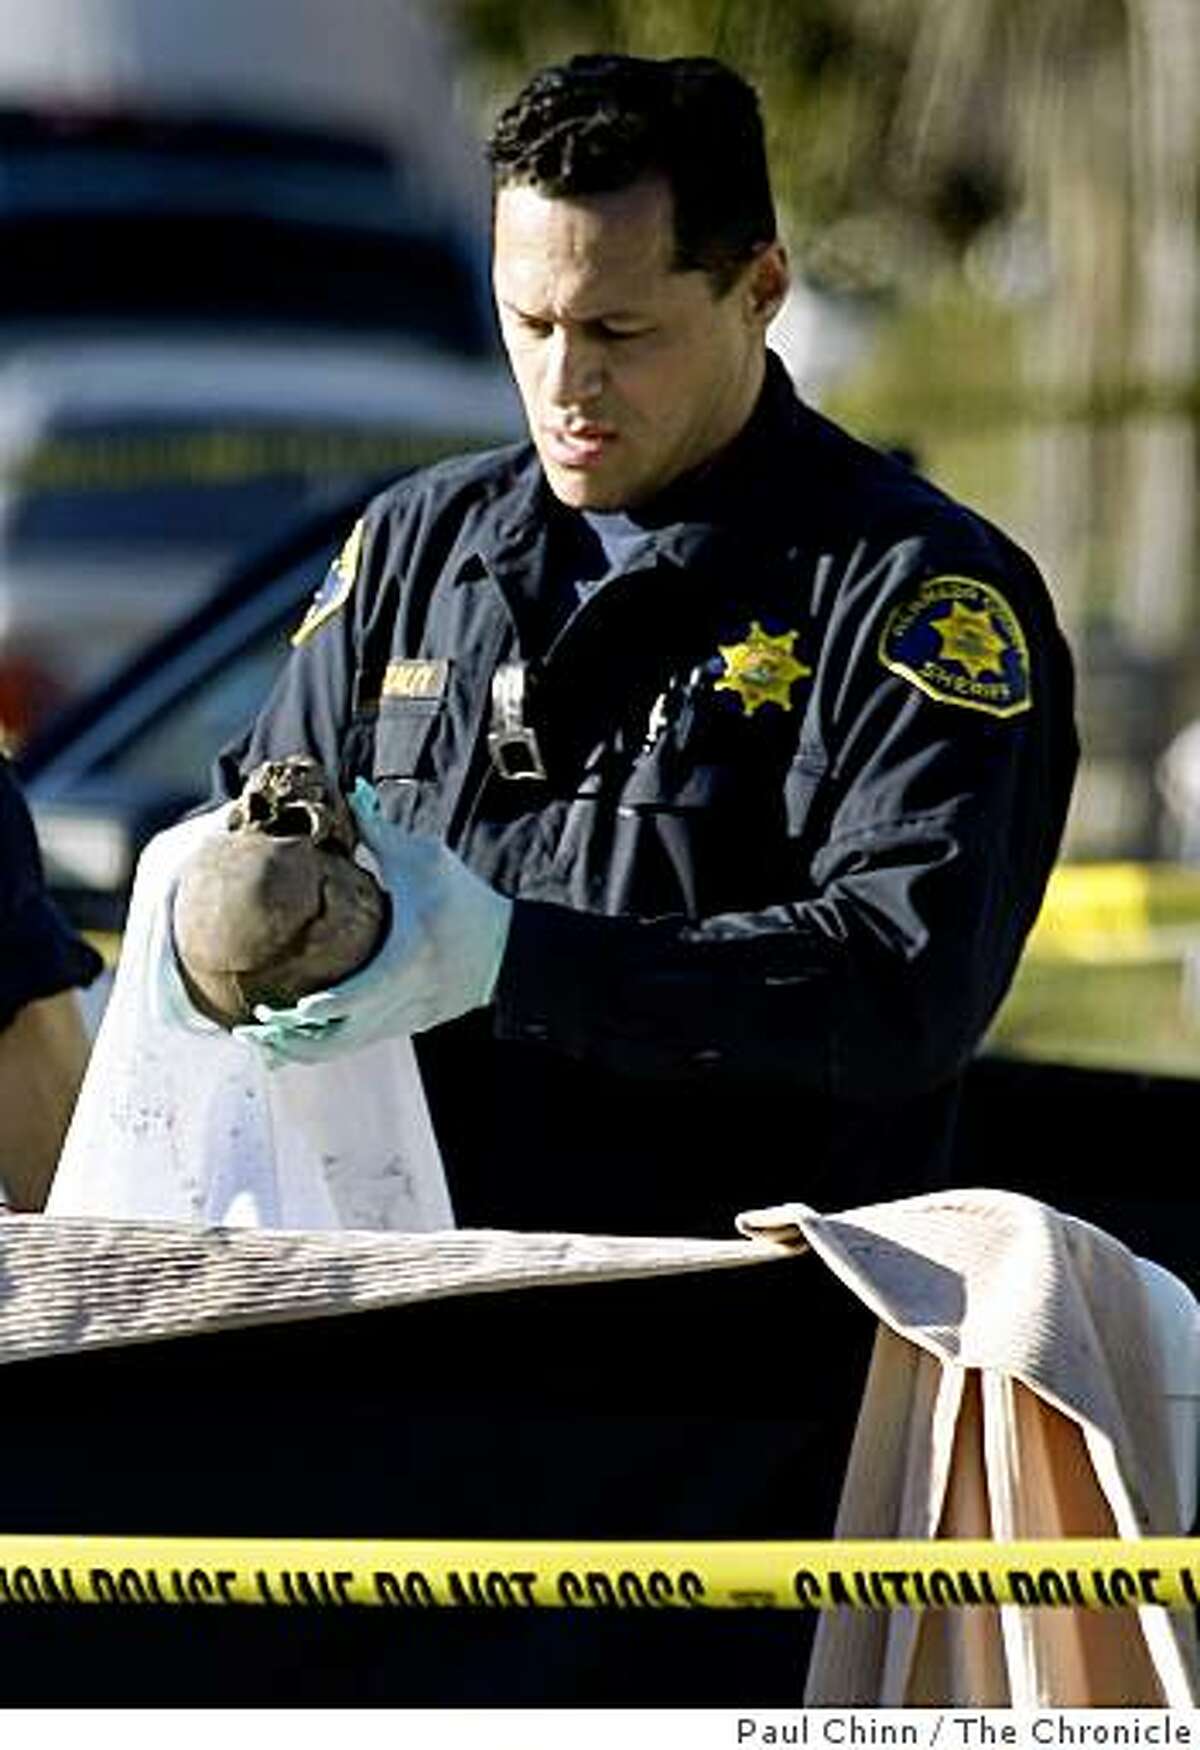 A coroner's investigator inspects a human skull after a road maintenance crew discovered the remains buried in mud on the 3000 block of Washington Street in Alameda, Calif., on Wednesday, Jan. 28, 2009.